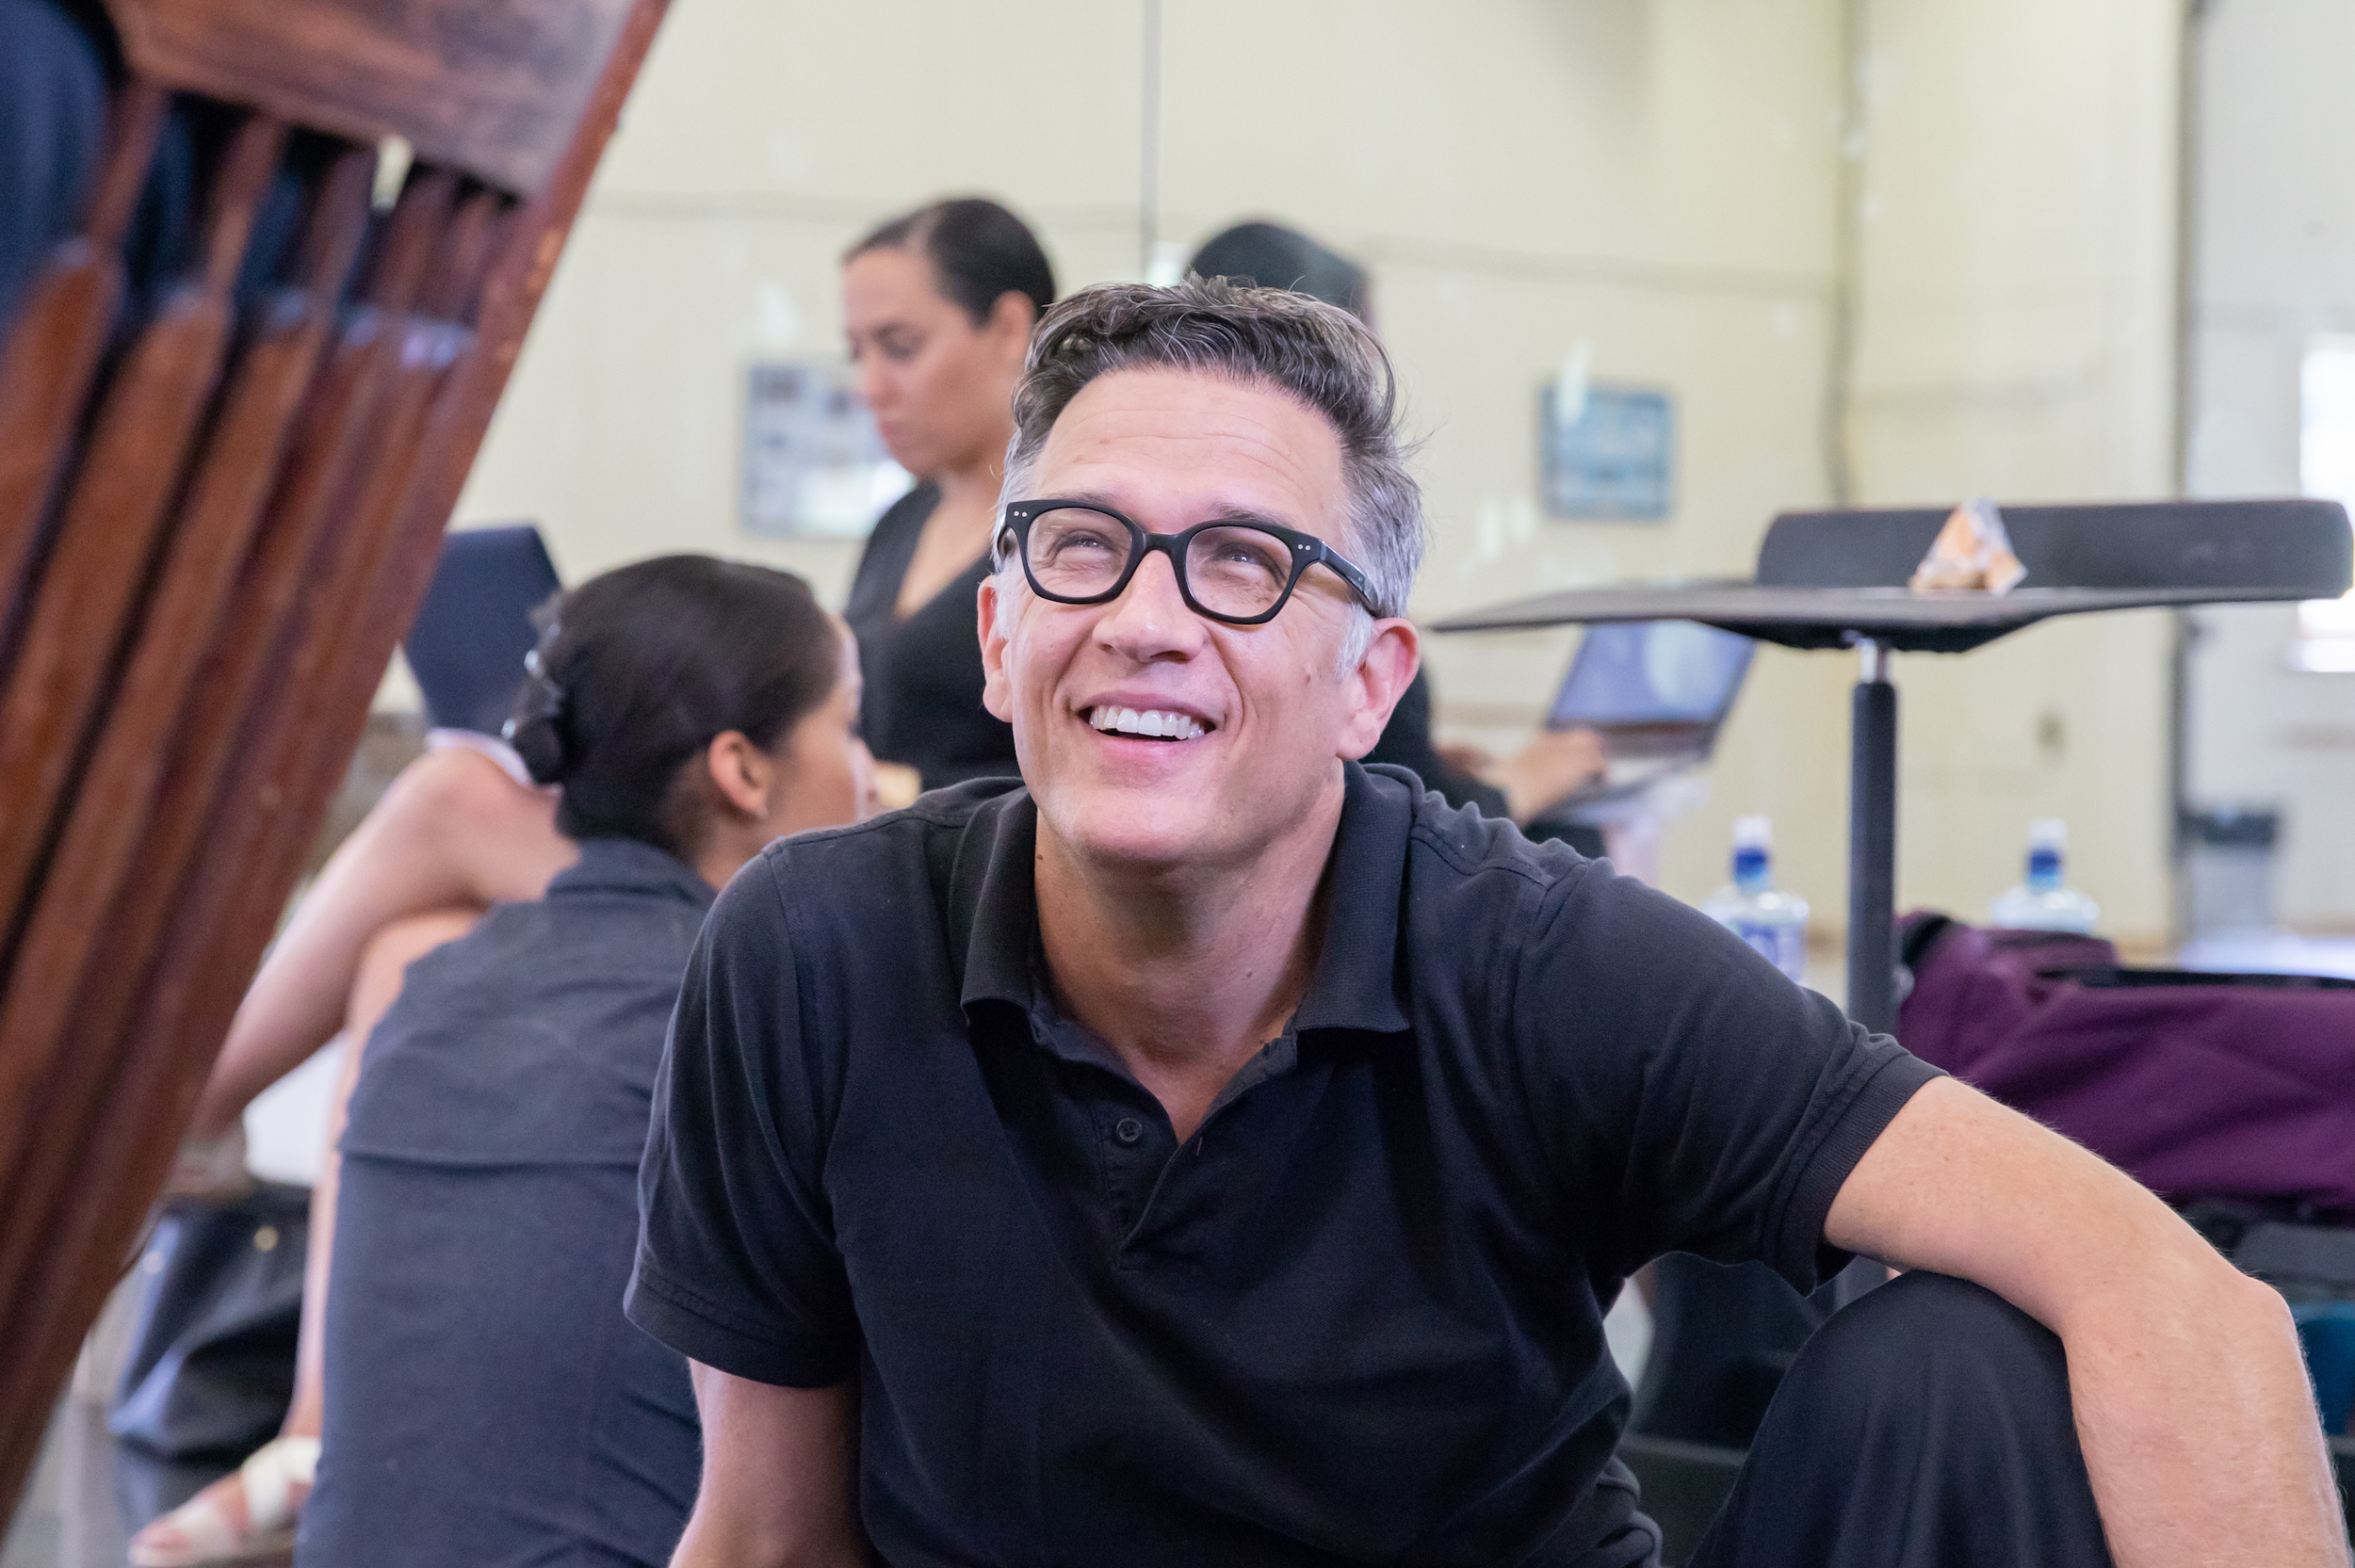 Paul Vasterling, wearing a black polo shirt and black-frame glasses, sits on the floor of a dance studio and looks up towards someone, smiling. Behind him another dancer sits facing the mirror, while an woman on the artistic staff sits crossed-legged in a chair, her back to the mirror, and looks at the laptop in her lap.